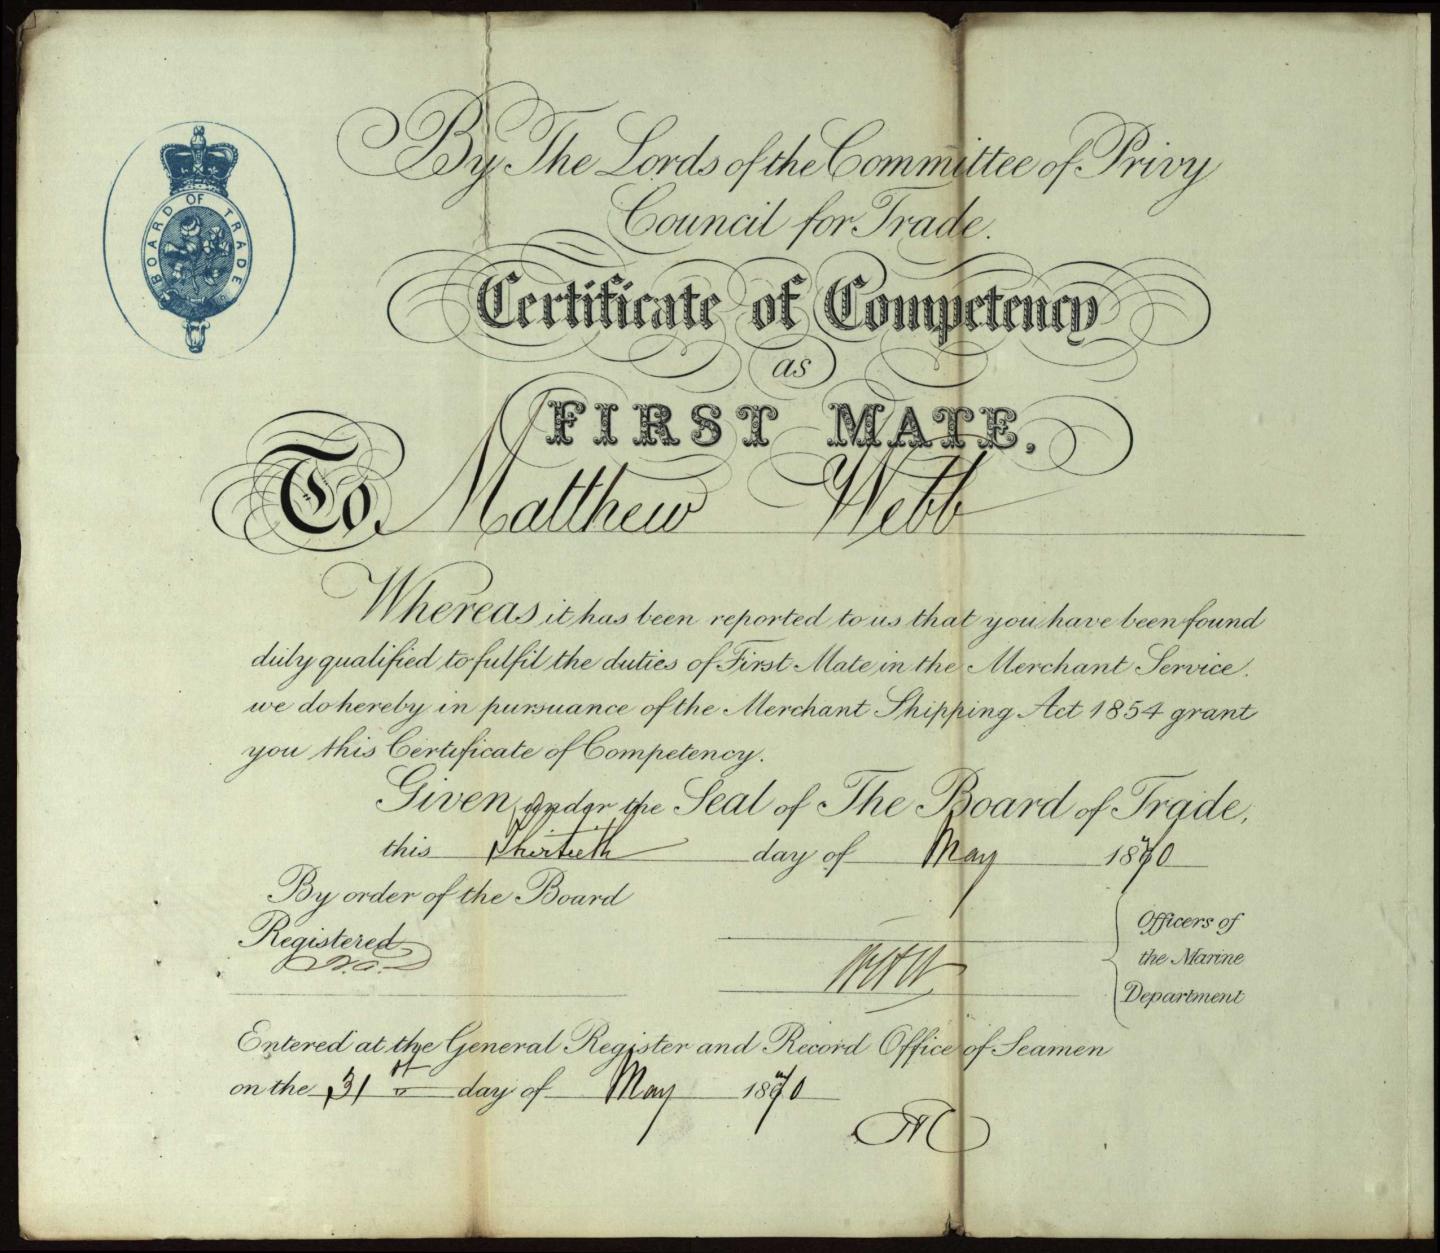 Webb’s first mate’s certificate